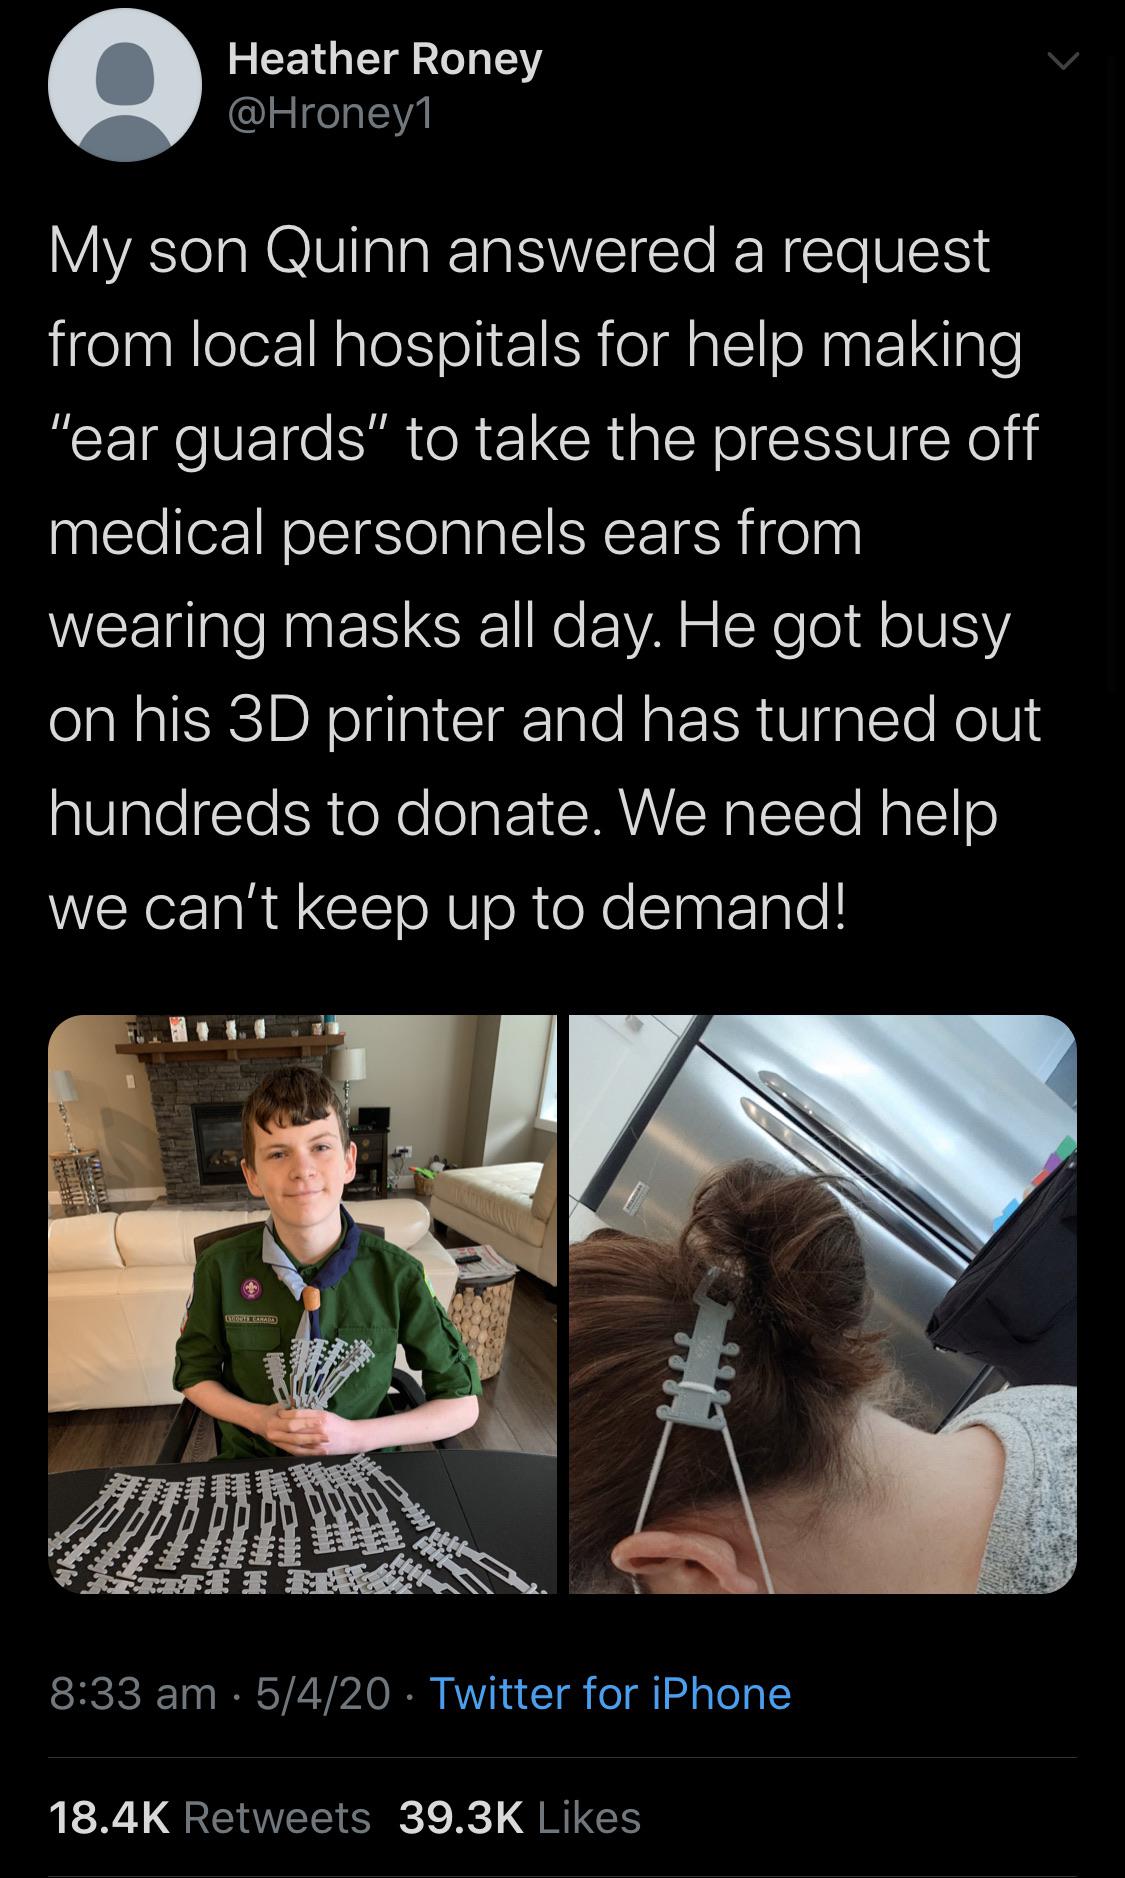 photo caption - Heather Roney My son Quinn answered a request from local hospitals for help making "ear guards to take the pressure off medical personnels ears from wearing masks all day. He got busy on his 3D printer and has turned out hundreds to donate